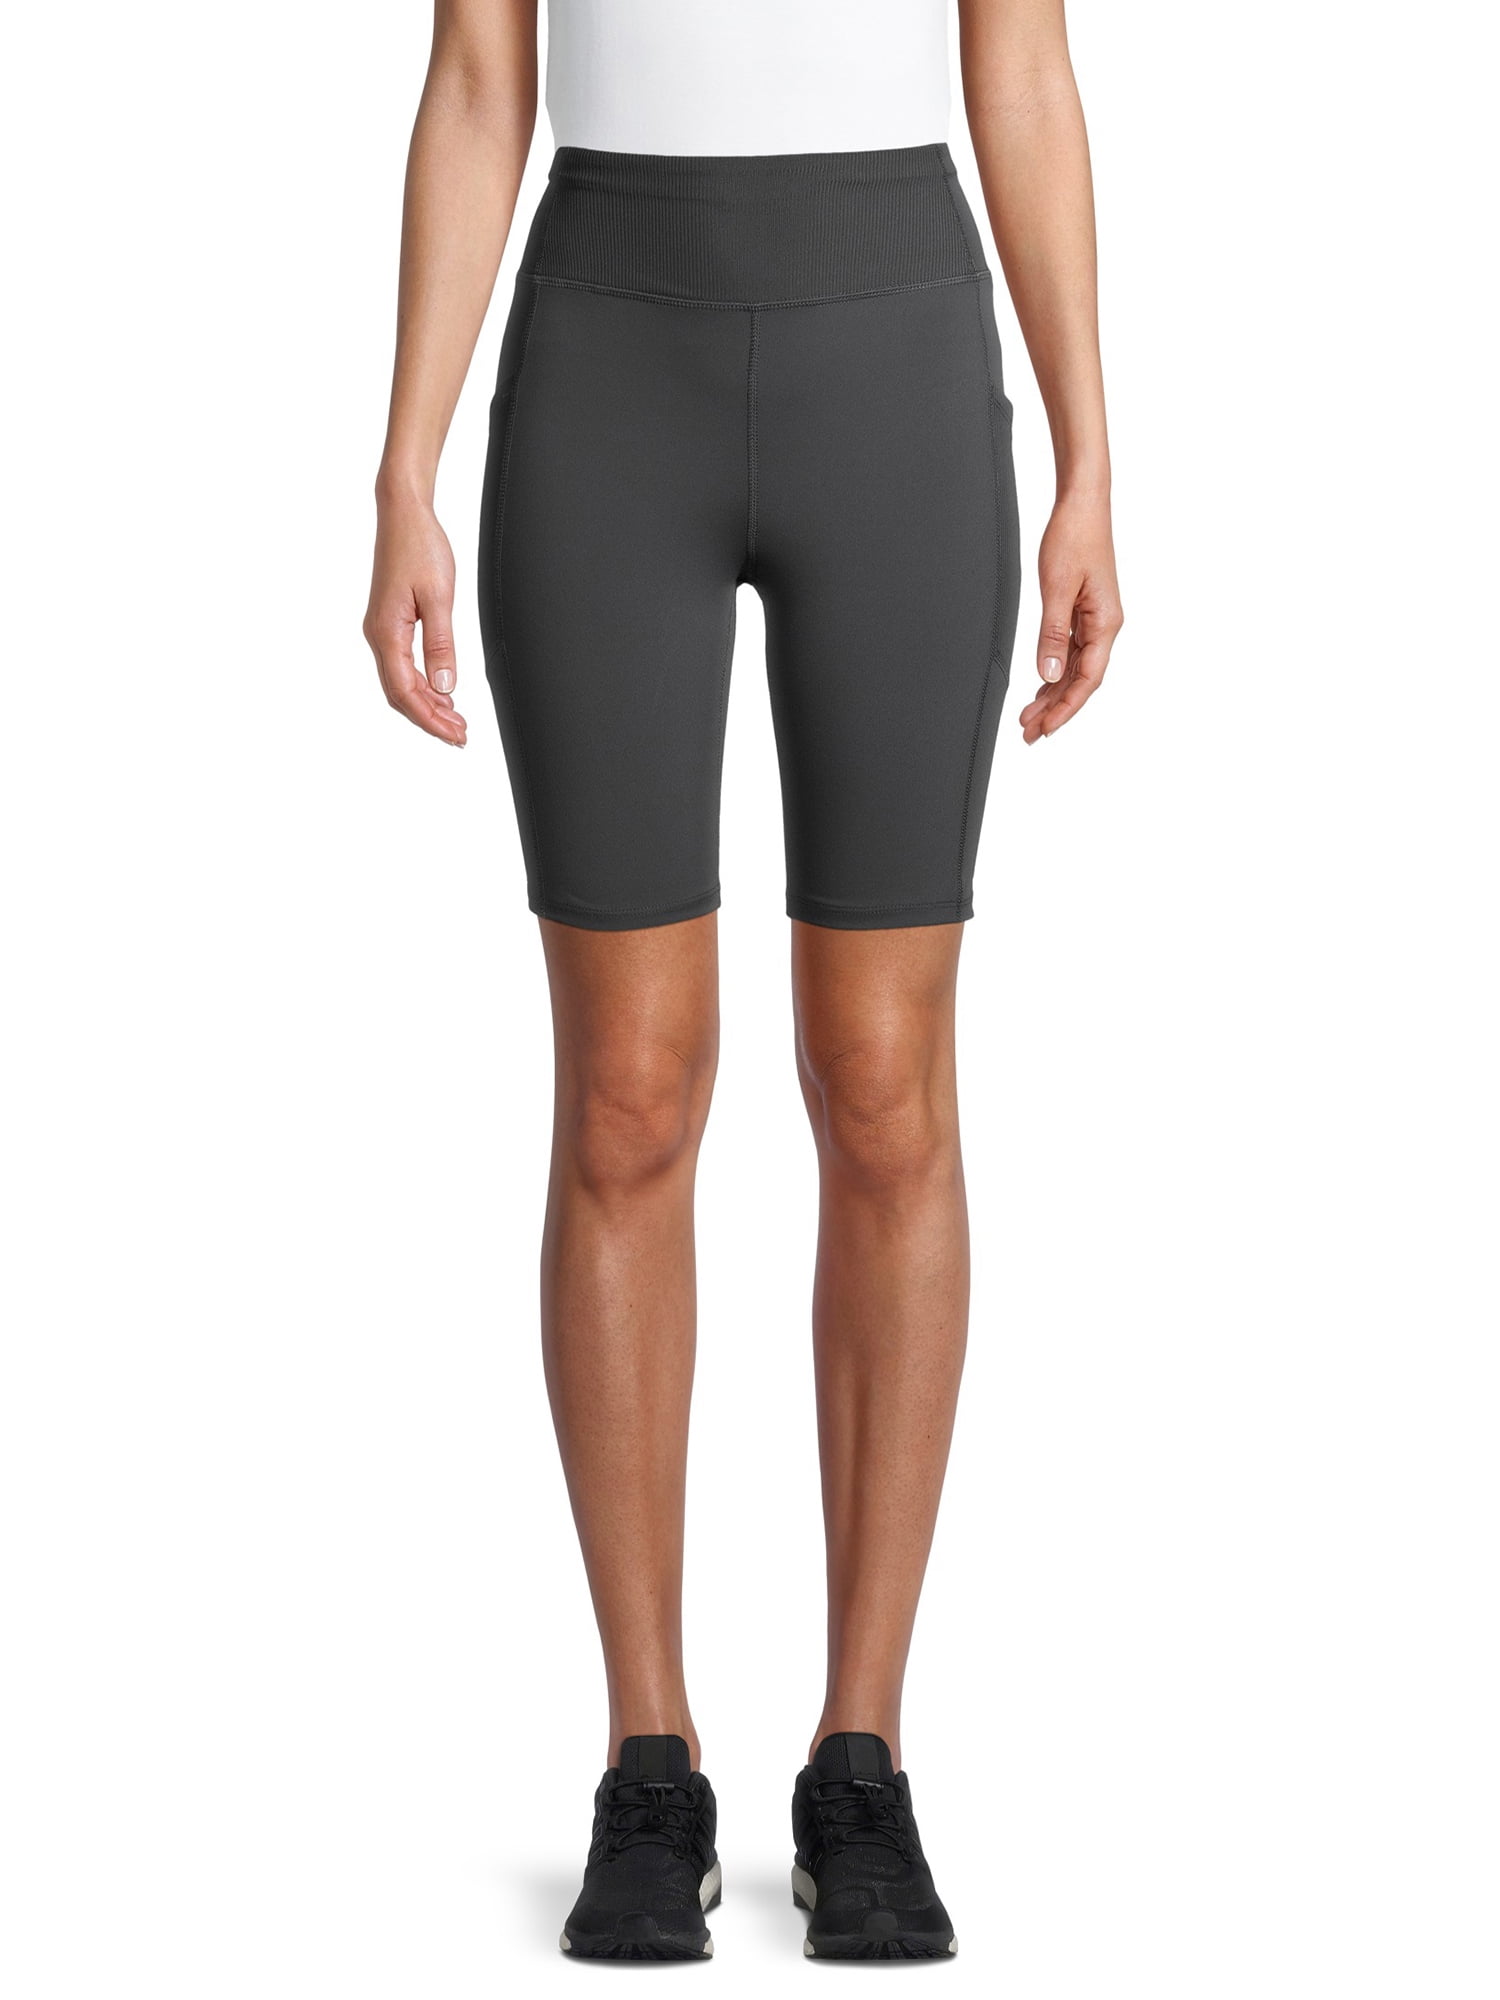 Athletic Works - Athletic Works Women's 9